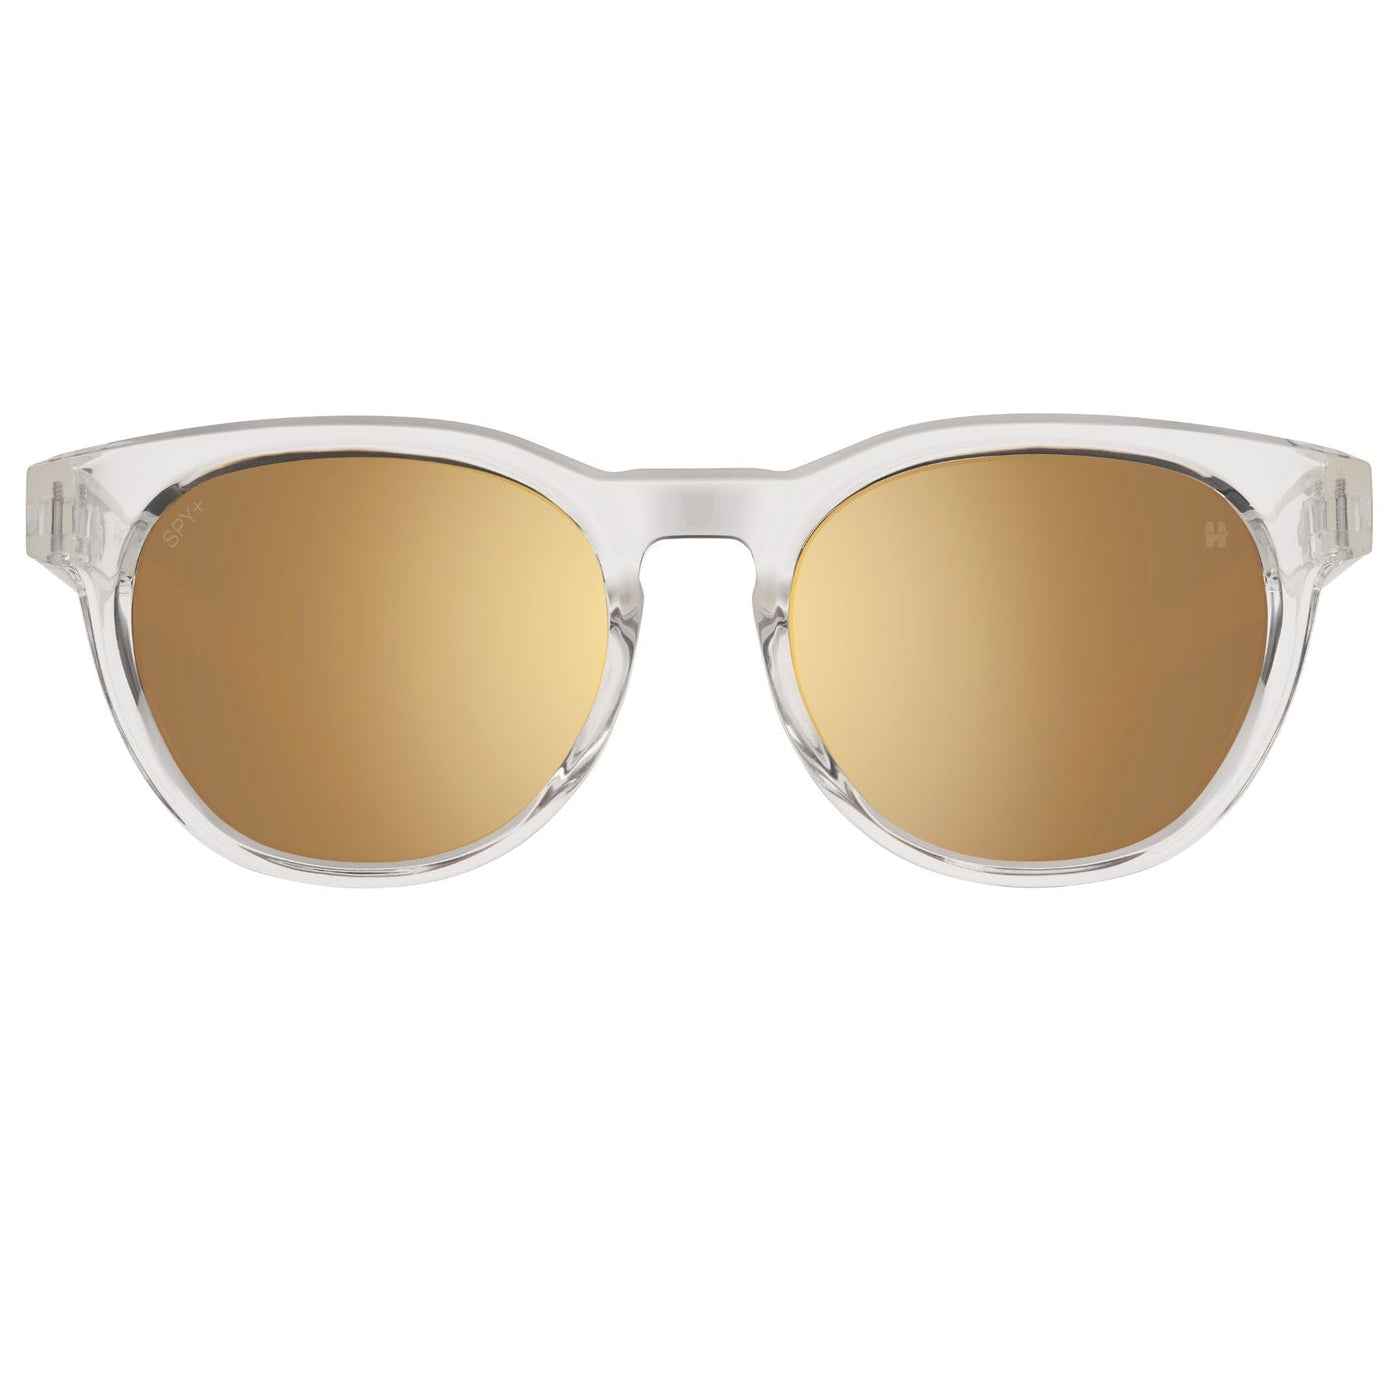 SPY CEDROS Sunglasses, Happy Lens - Gold 8Lines Shop - Fast Shipping